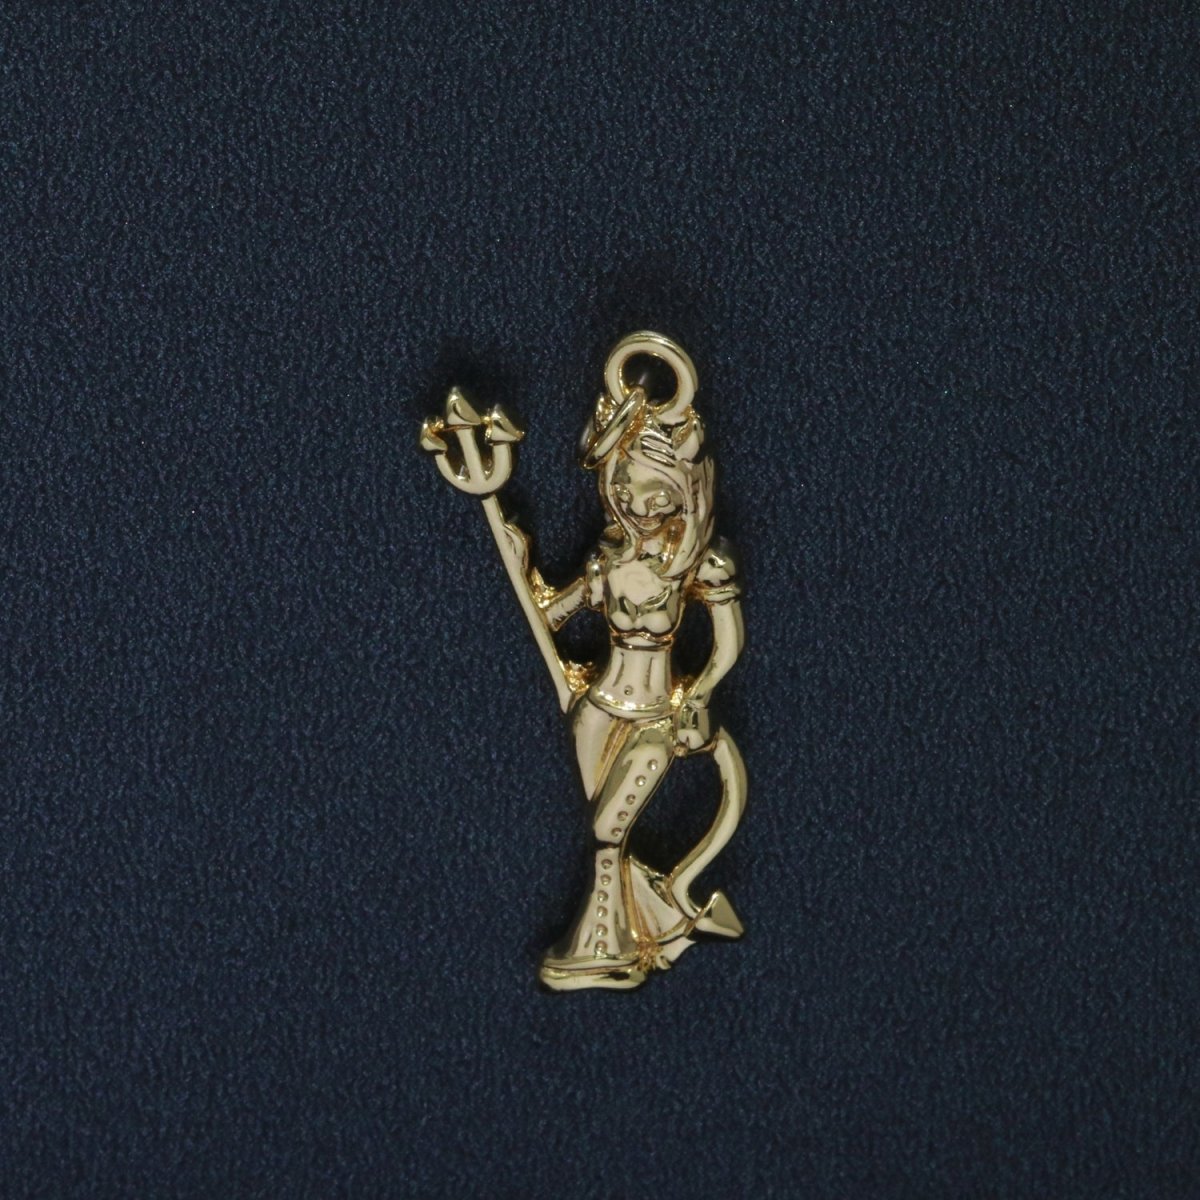 Bad Girl Charm Sexy Charm Devil Girl with Trident for Bracelet Necklace Earring Component E-877 - DLUXCA